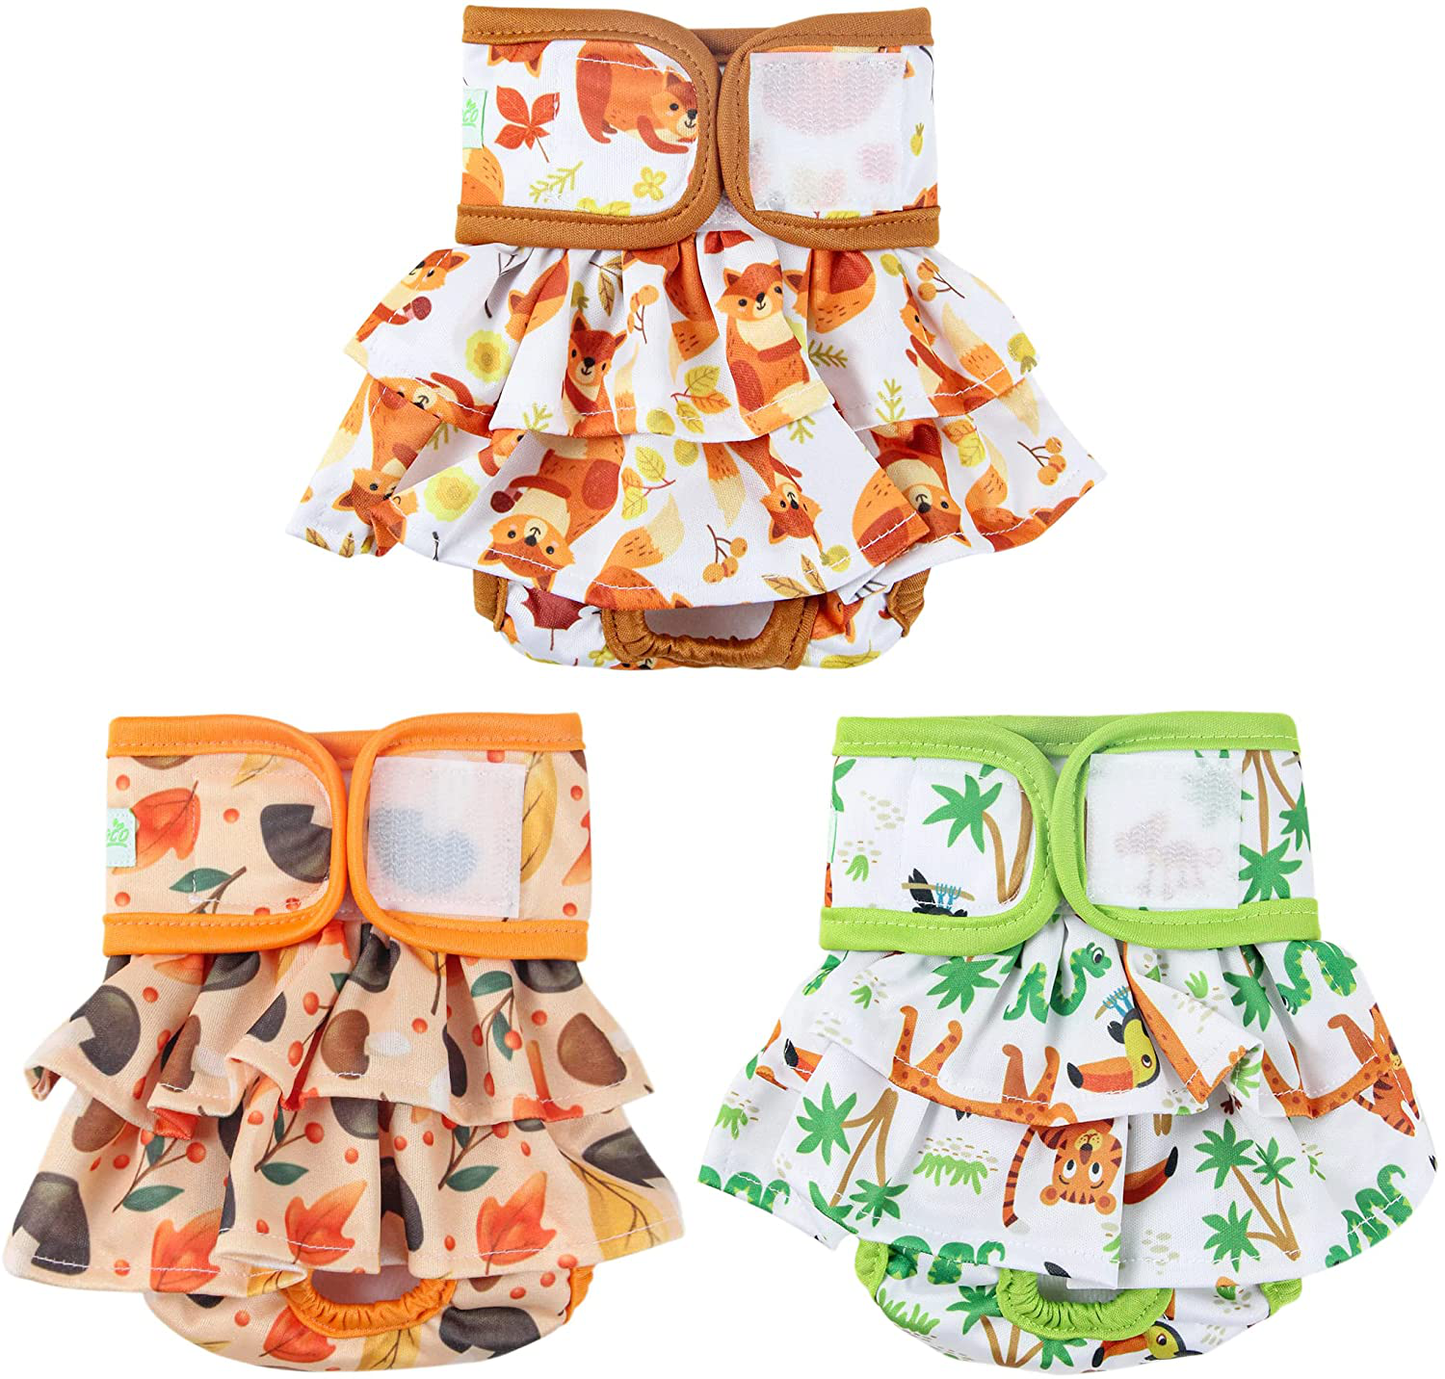 Wegreeco Washable Dog Diapers (3 Pack), Highly Absorbent Dog Diapers for Female Dogs, Dog Dresses for Dogs in Heat, Period, Incontinence, or Excitable Urination Animals & Pet Supplies > Pet Supplies > Dog Supplies > Dog Diaper Pads & Liners wegreeco Awakened Lively Forest Medium (Pack of 3) 